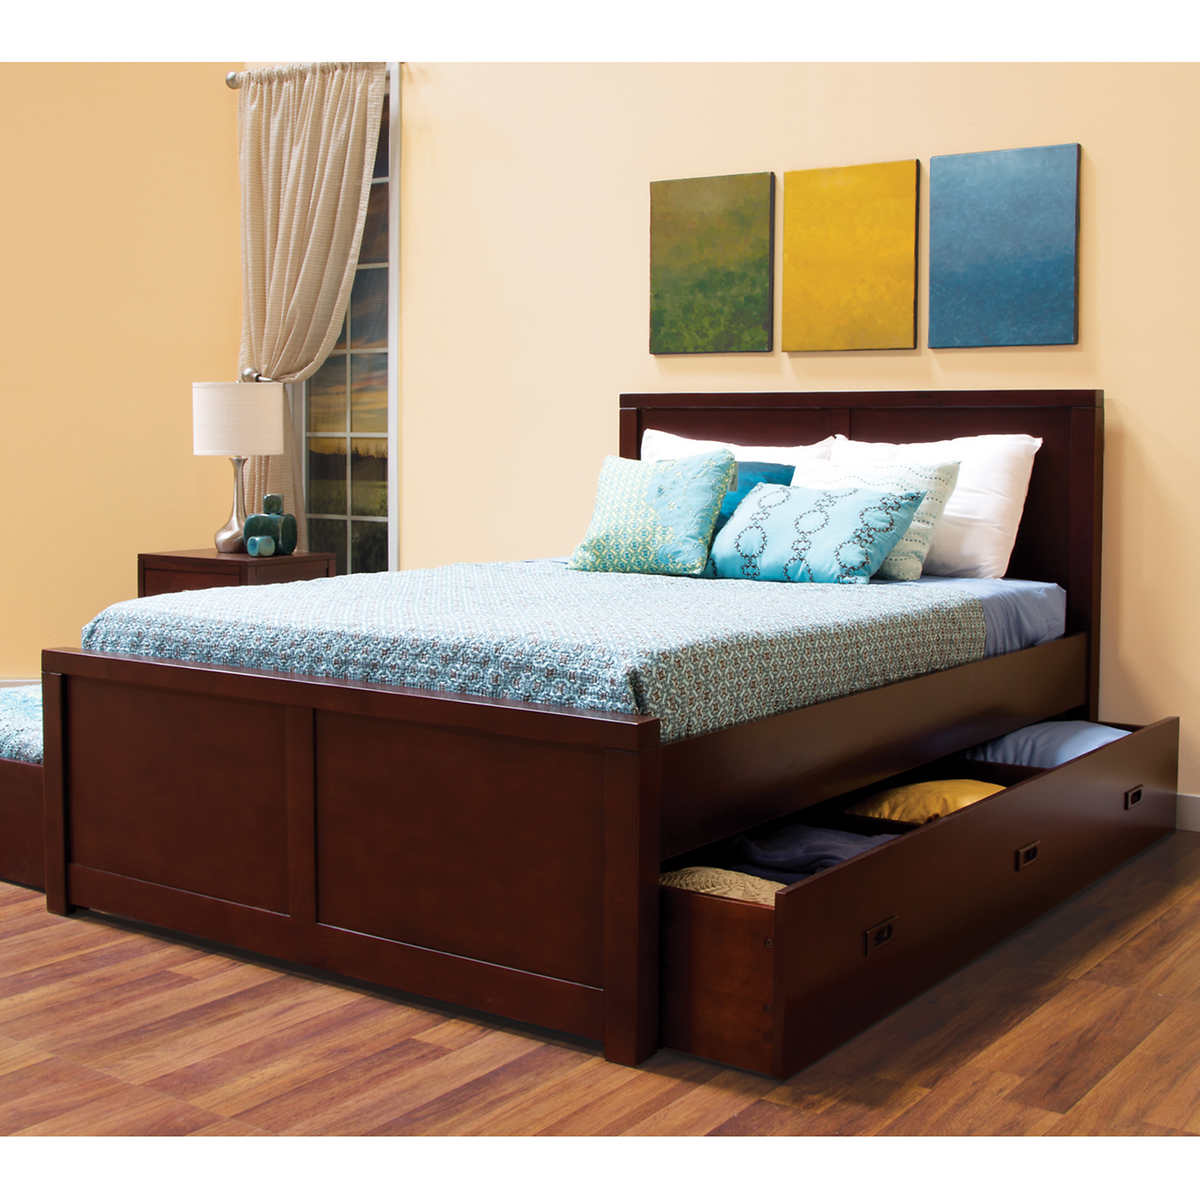 Peyton Full Bed With Trundle And Storage